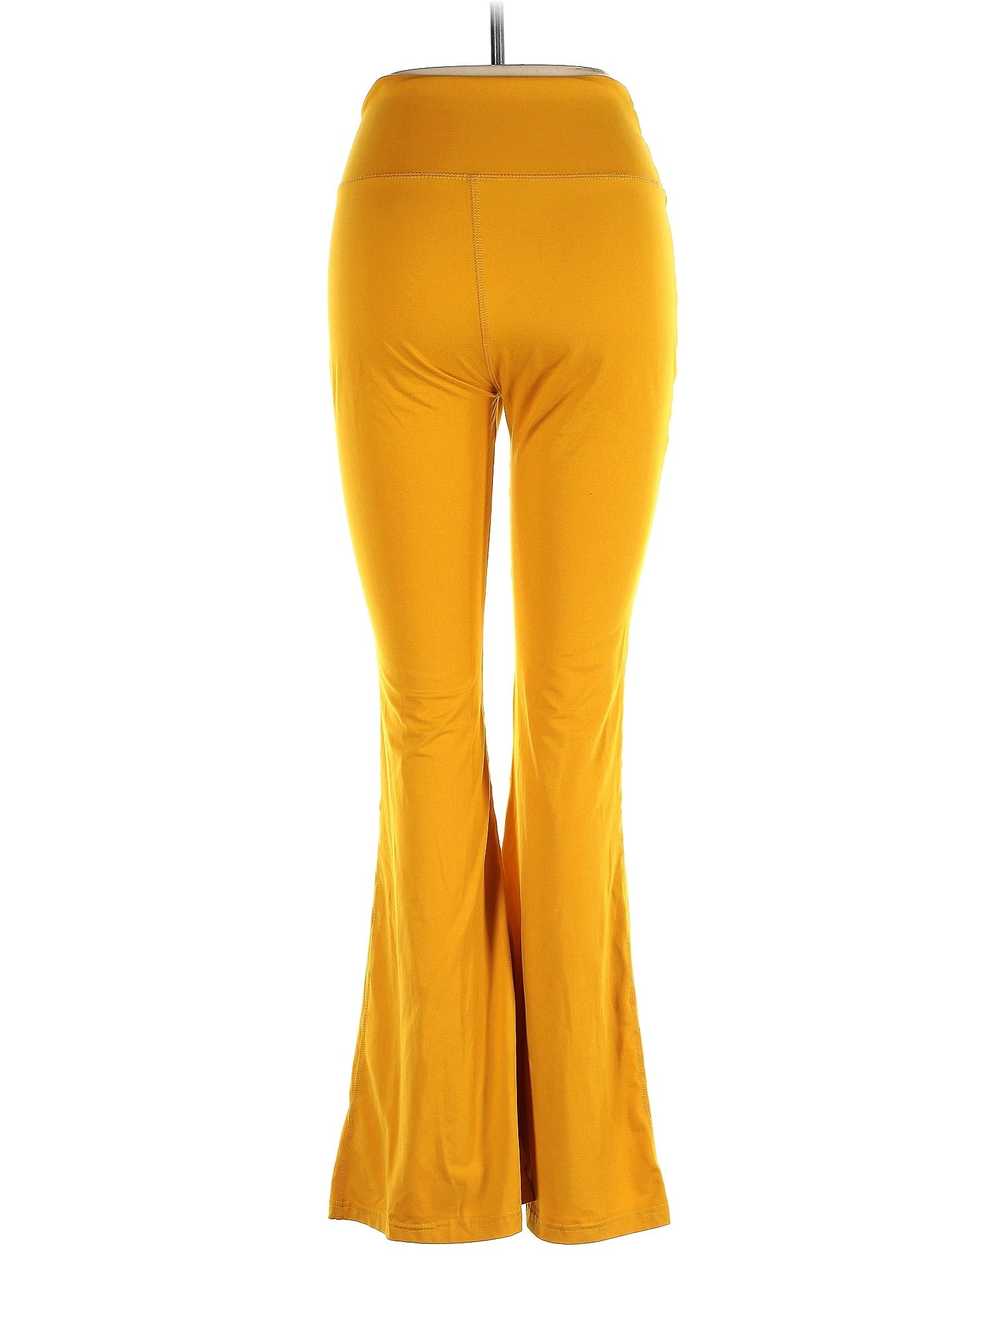 Unbranded Women Yellow Casual Pants S - image 2